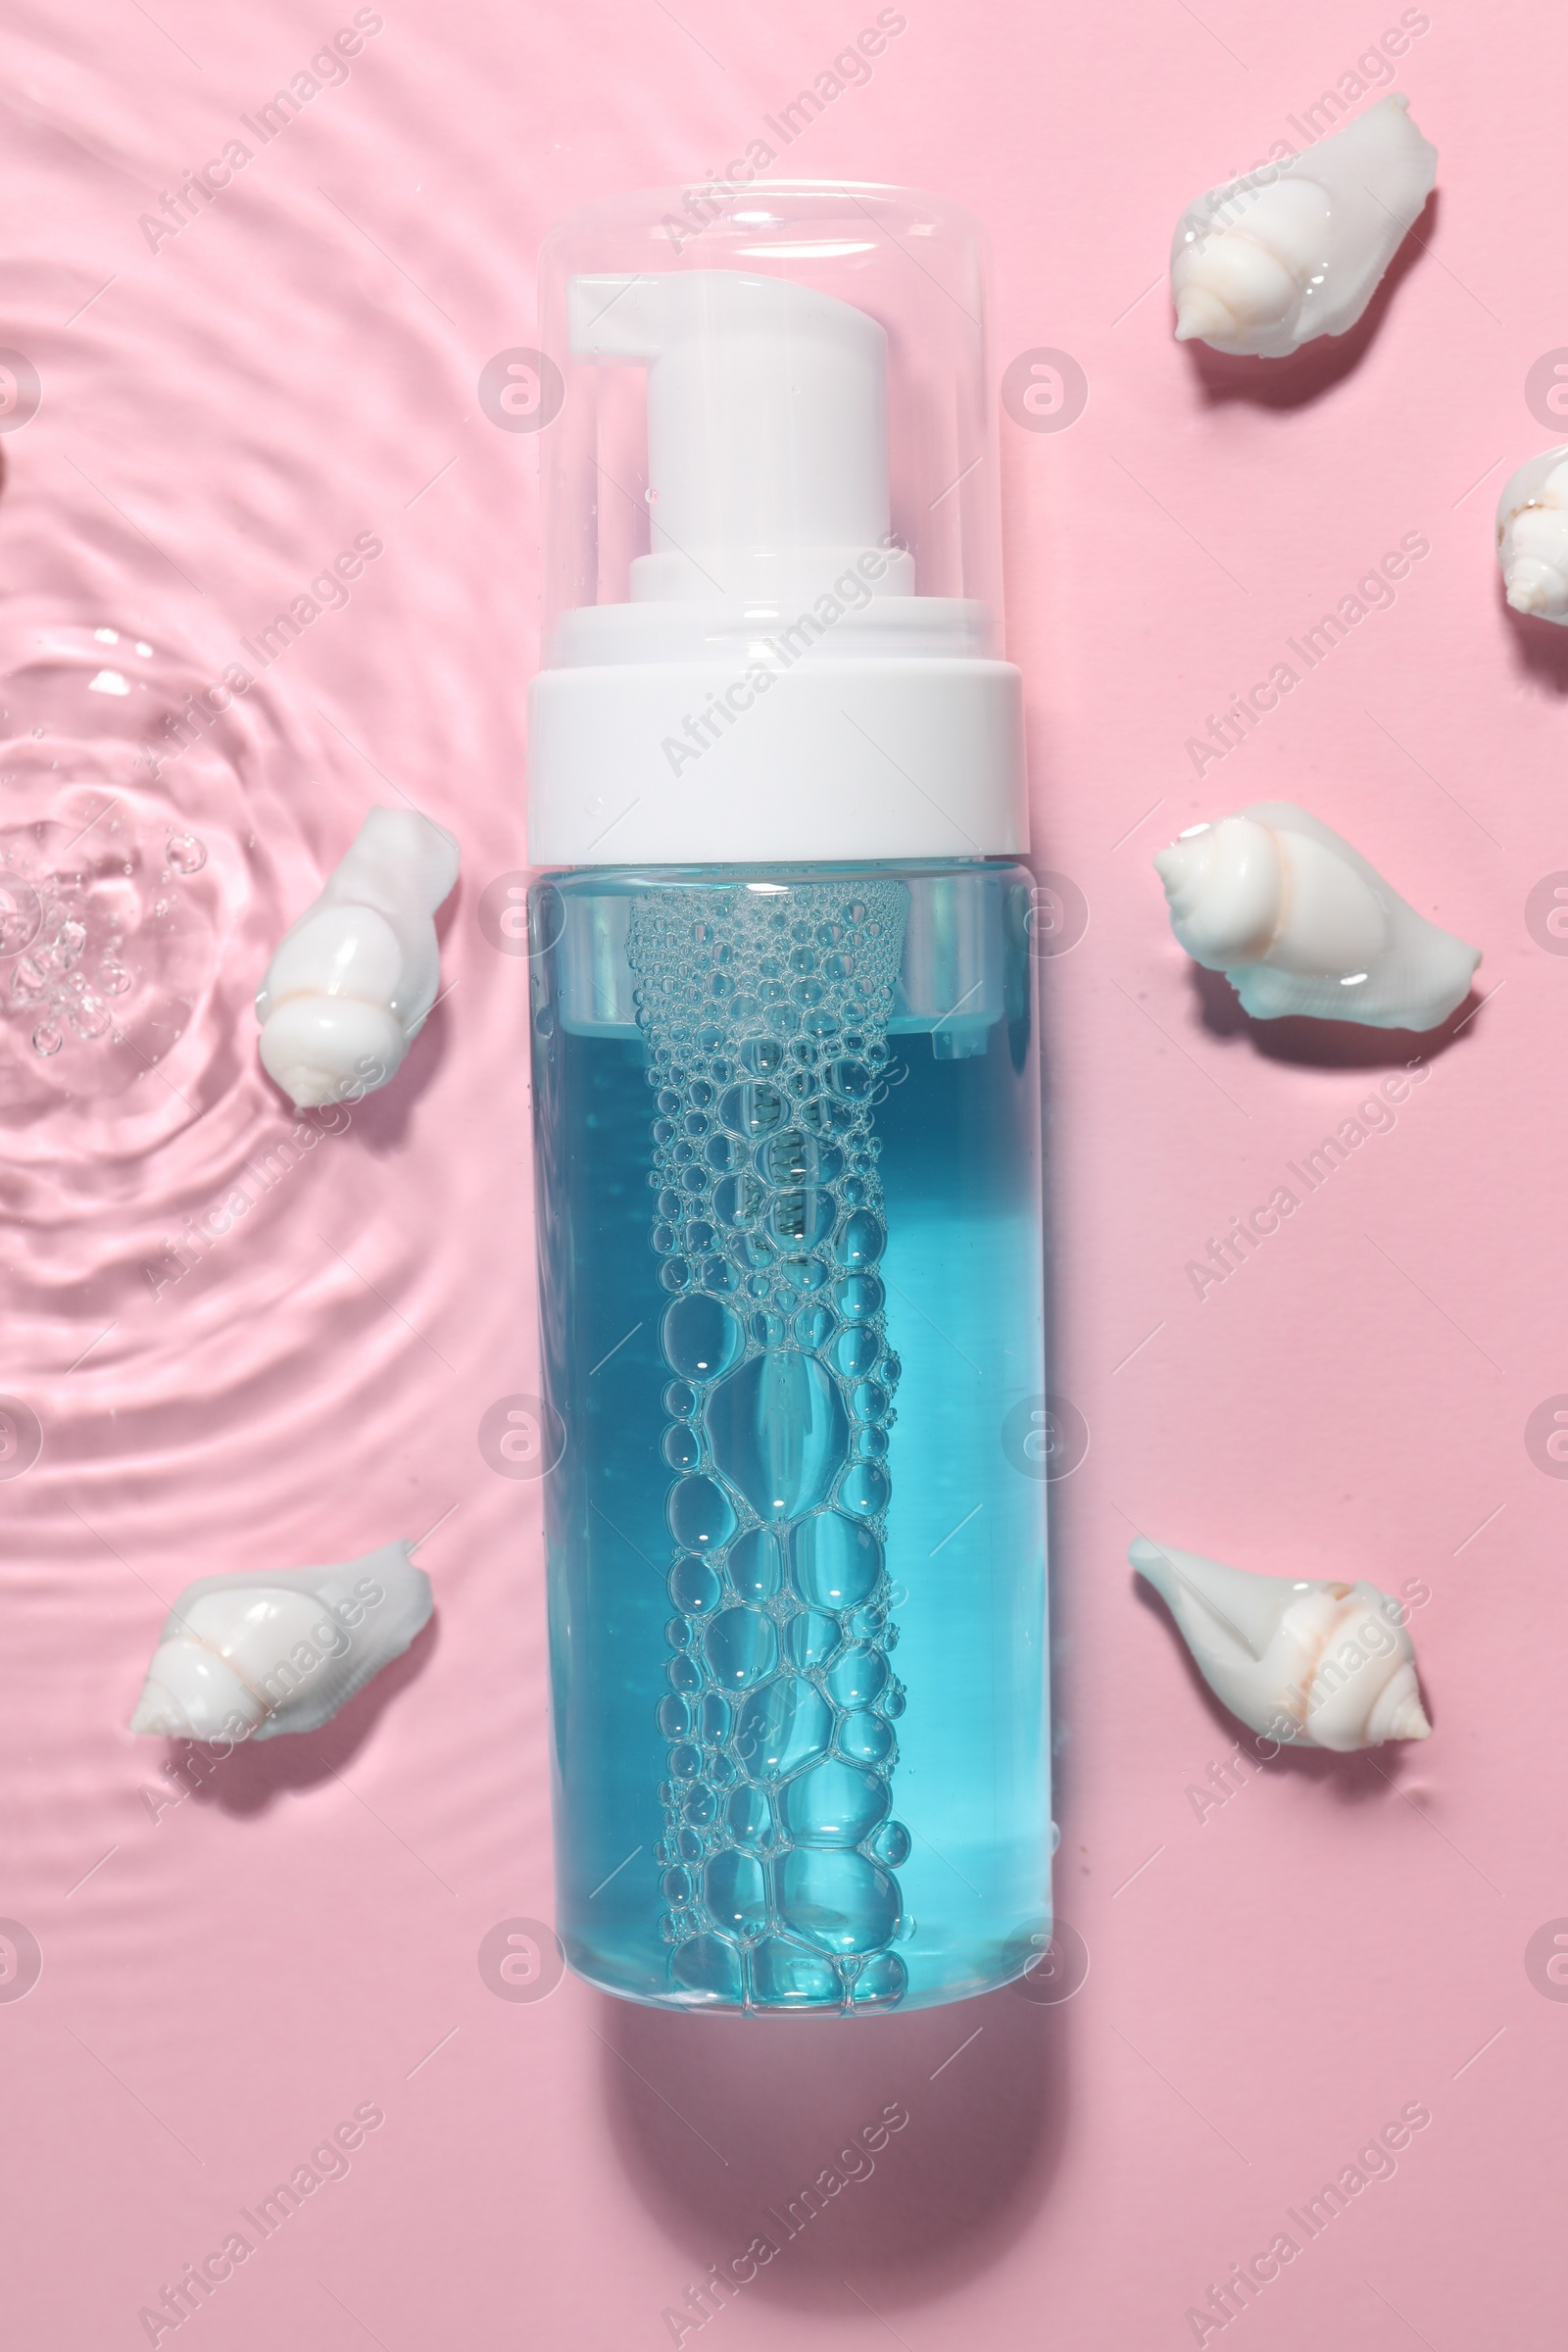 Photo of Bottle of facial cleanser and seashells in water against pink background, flat lay